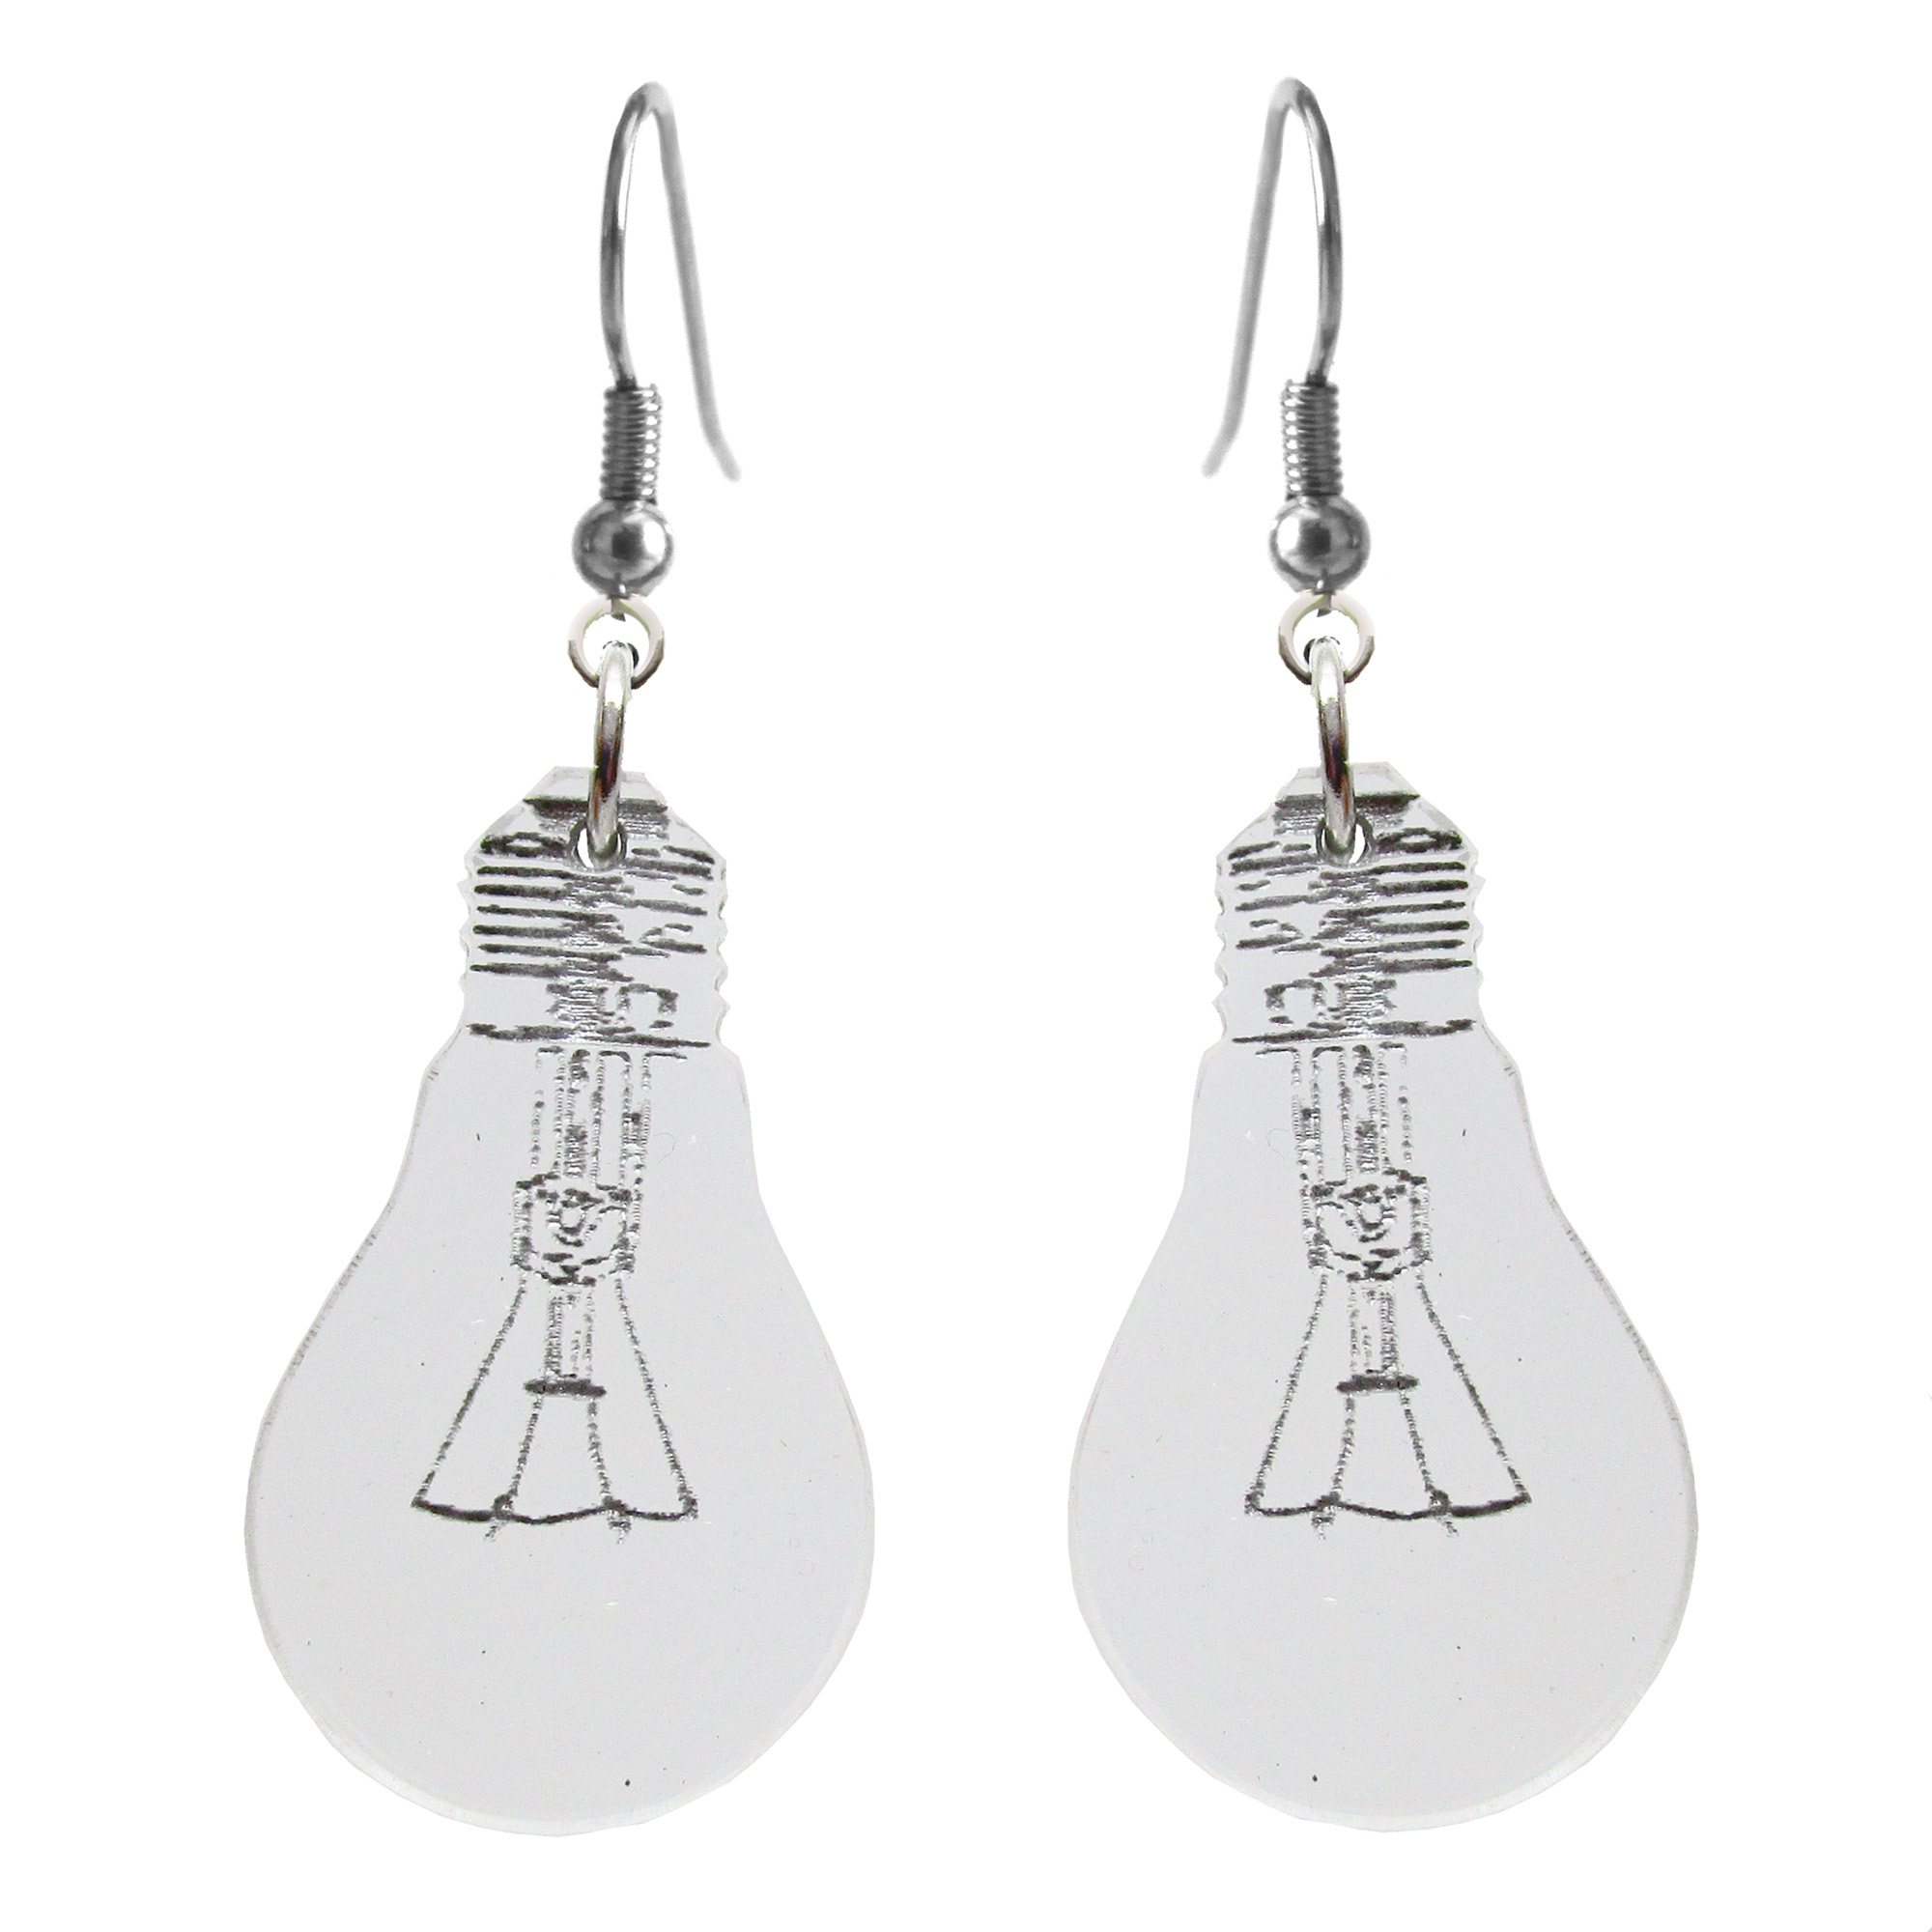 Light Bulb Dangling Earring Necklace Set Special Funny Hippie Hipster Pendant 